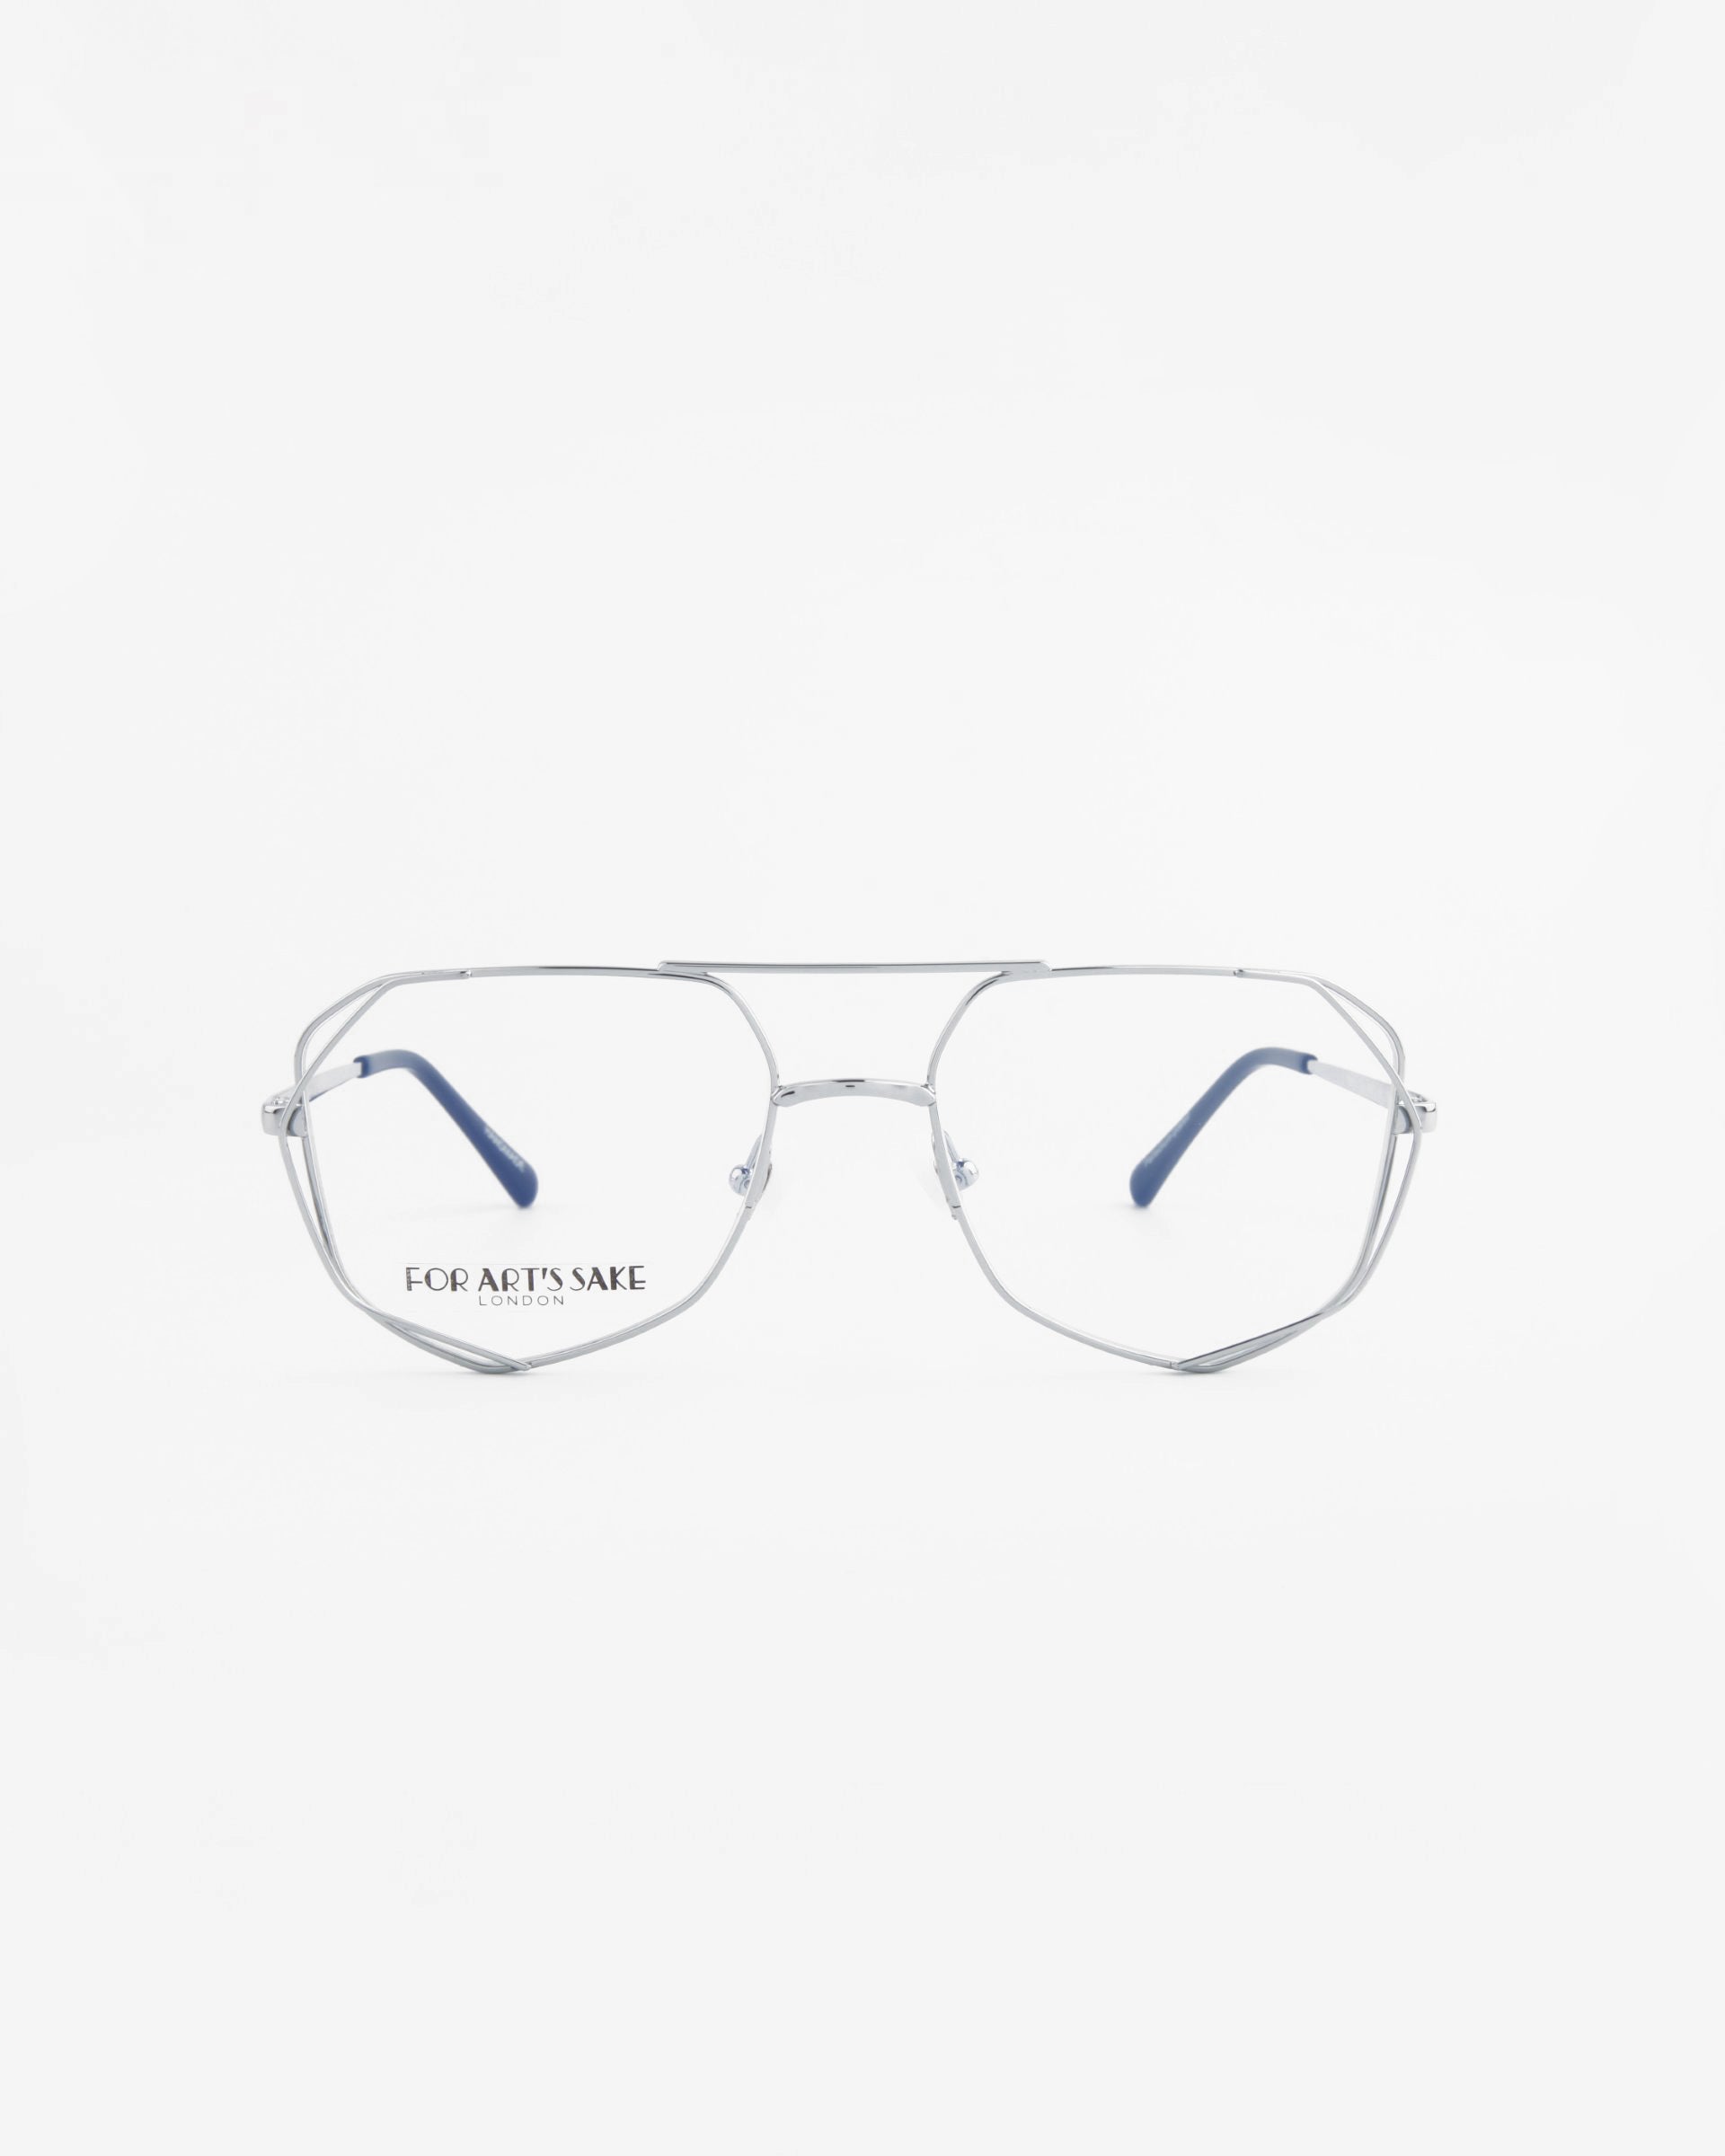 A pair of aviator-style eyeglasses with thin silver metal frames and navy blue temple tips. The lenses are clear with a built-in blue light filter, perfect for screen time. The left lens features the text &quot;FOR ART&#39;S SAKE.&quot; The background is a clean, solid white. These stylish eyeglasses are known as Genius Two by For Art&#39;s Sake®.